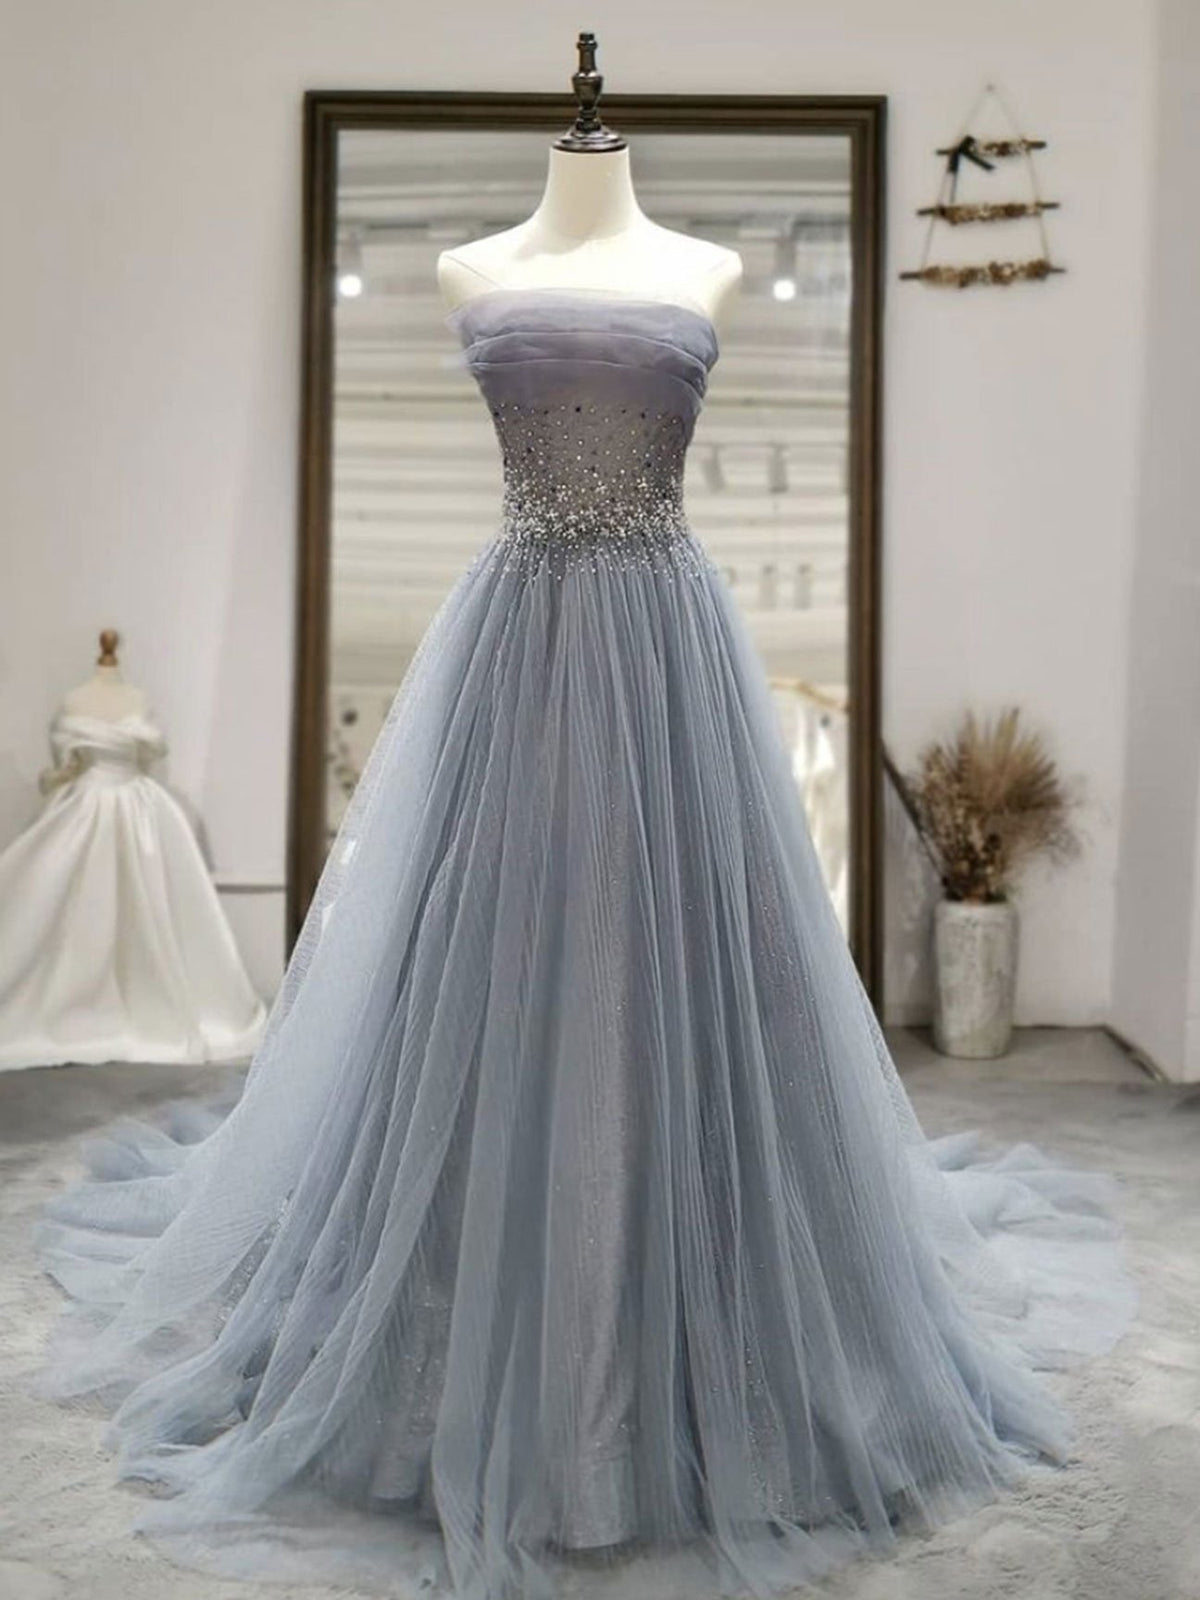 Formal Dress Outfits, Strapless Gray Tulle Long Prom Dresses, Strapless Gray Long Formal Evening Dresses